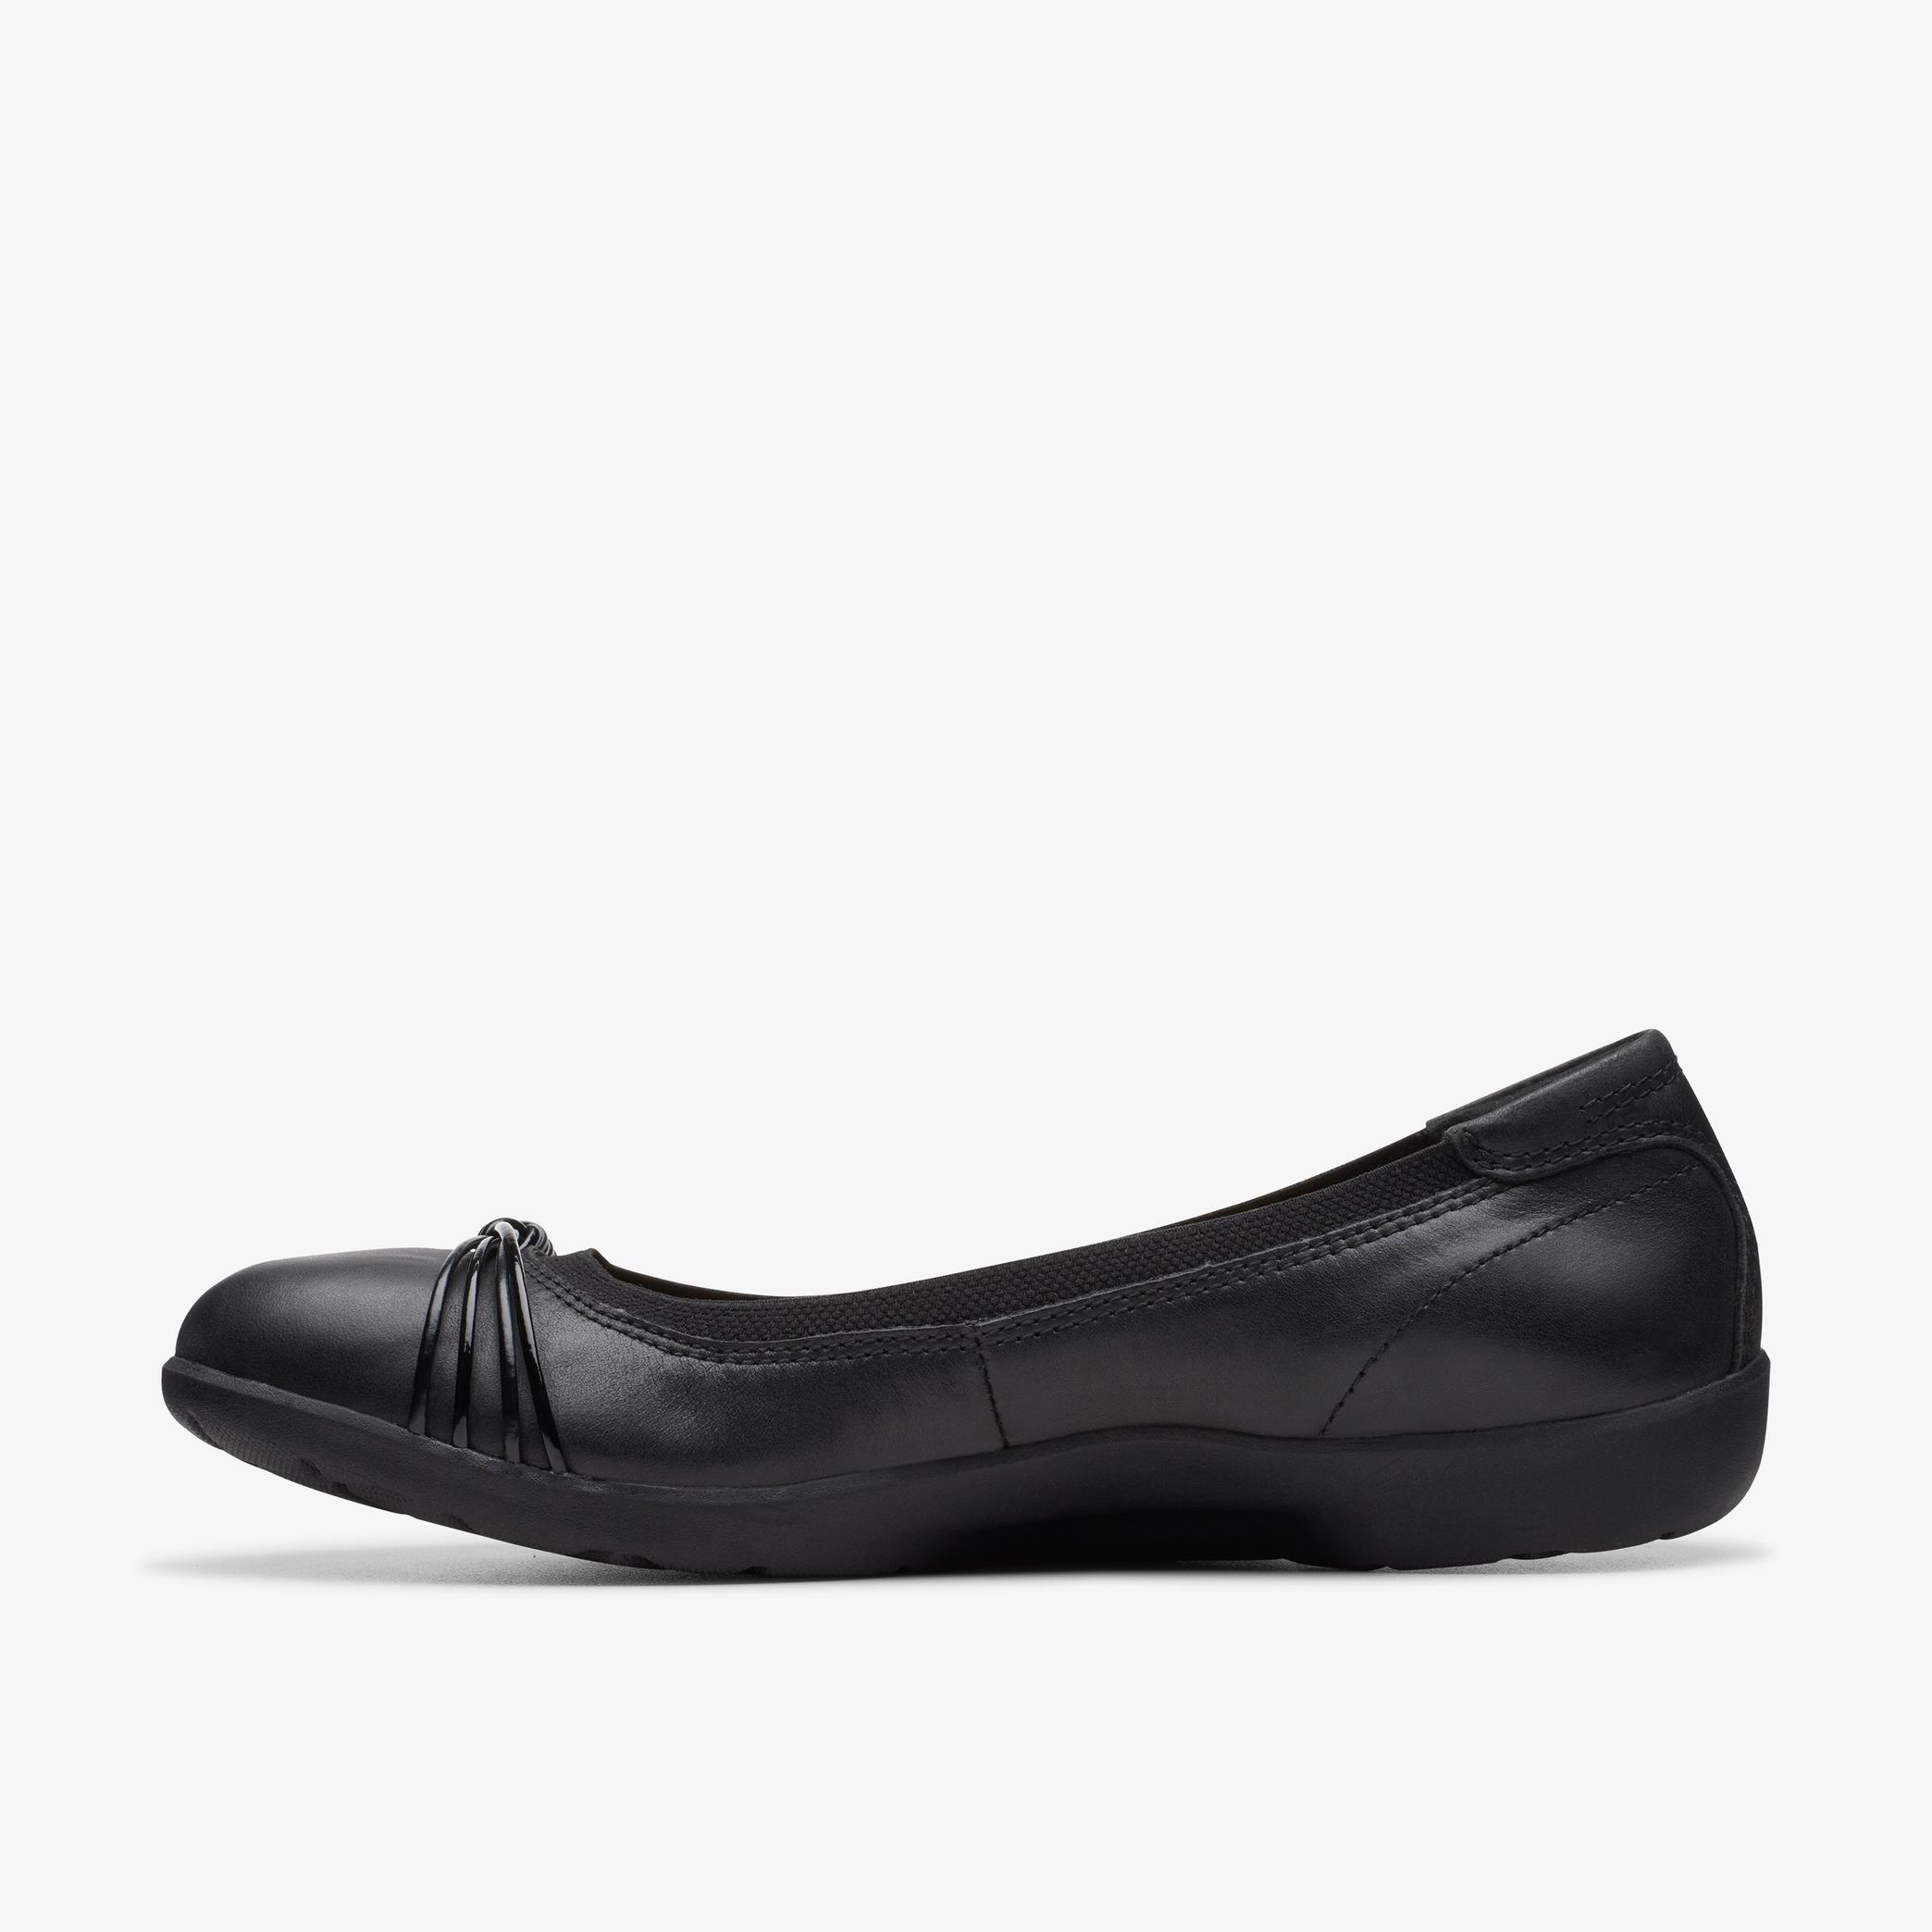 WOMENS Meadow Rae Black Leather Ballerina Shoes | Clarks US